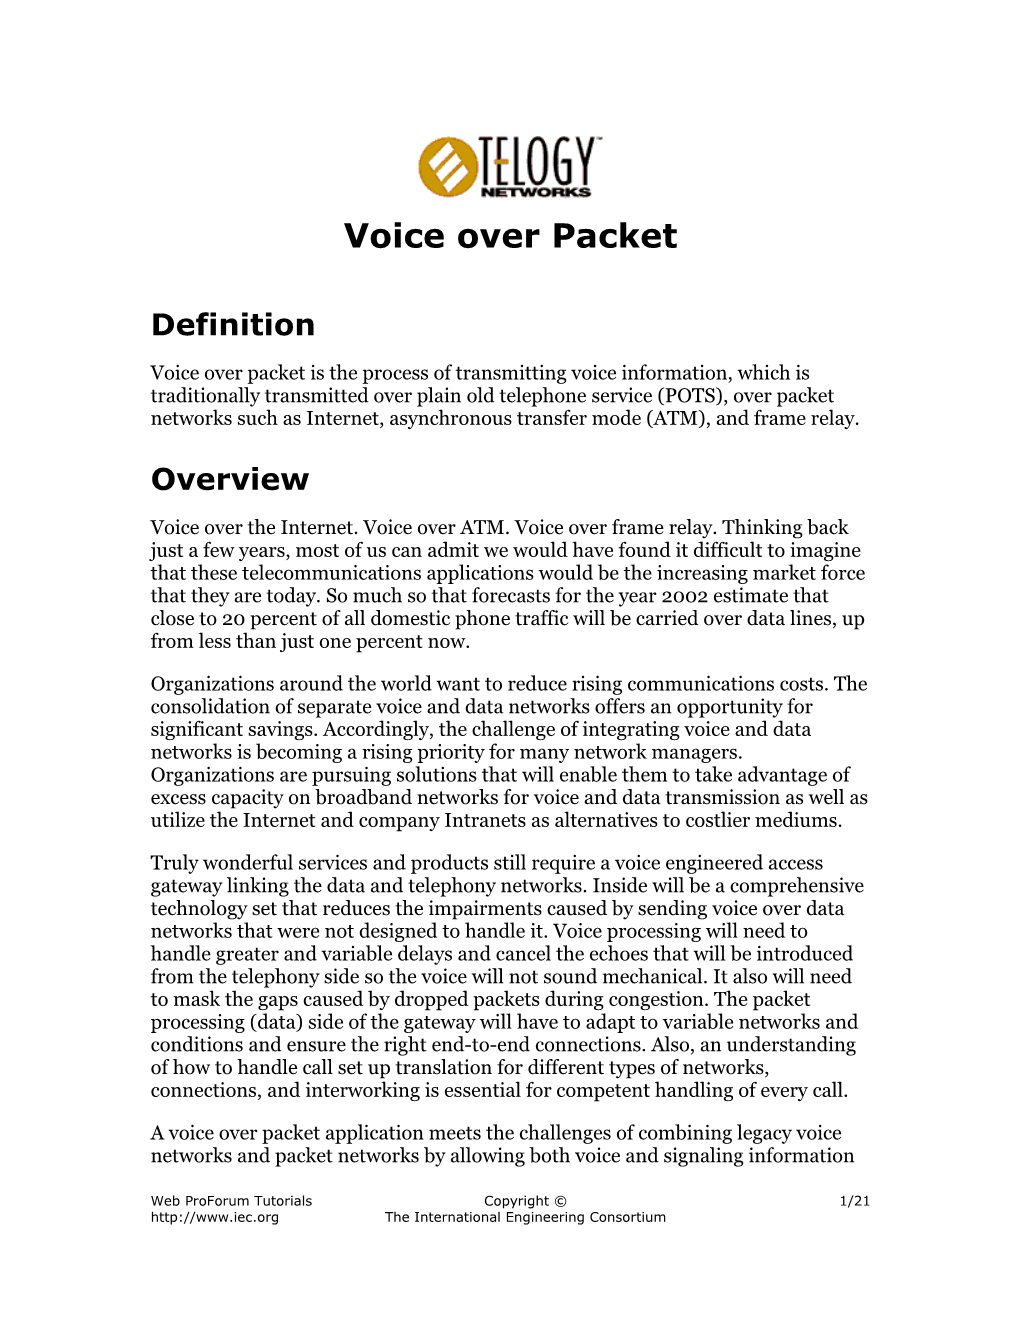 Voice Over Packet